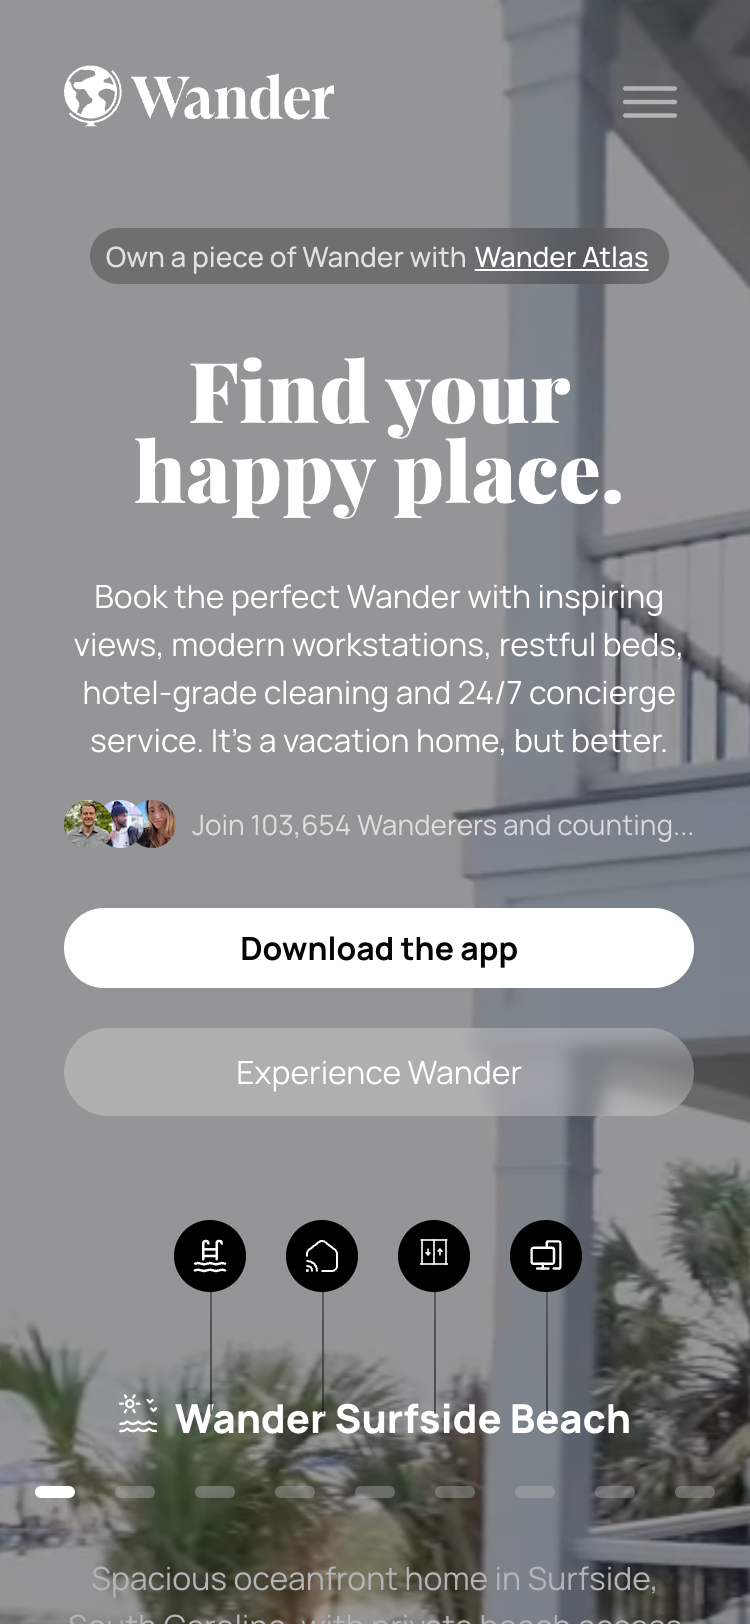 The Wander homepage hero section on a mobile device. The content of the page is a compact version of the desktop version.